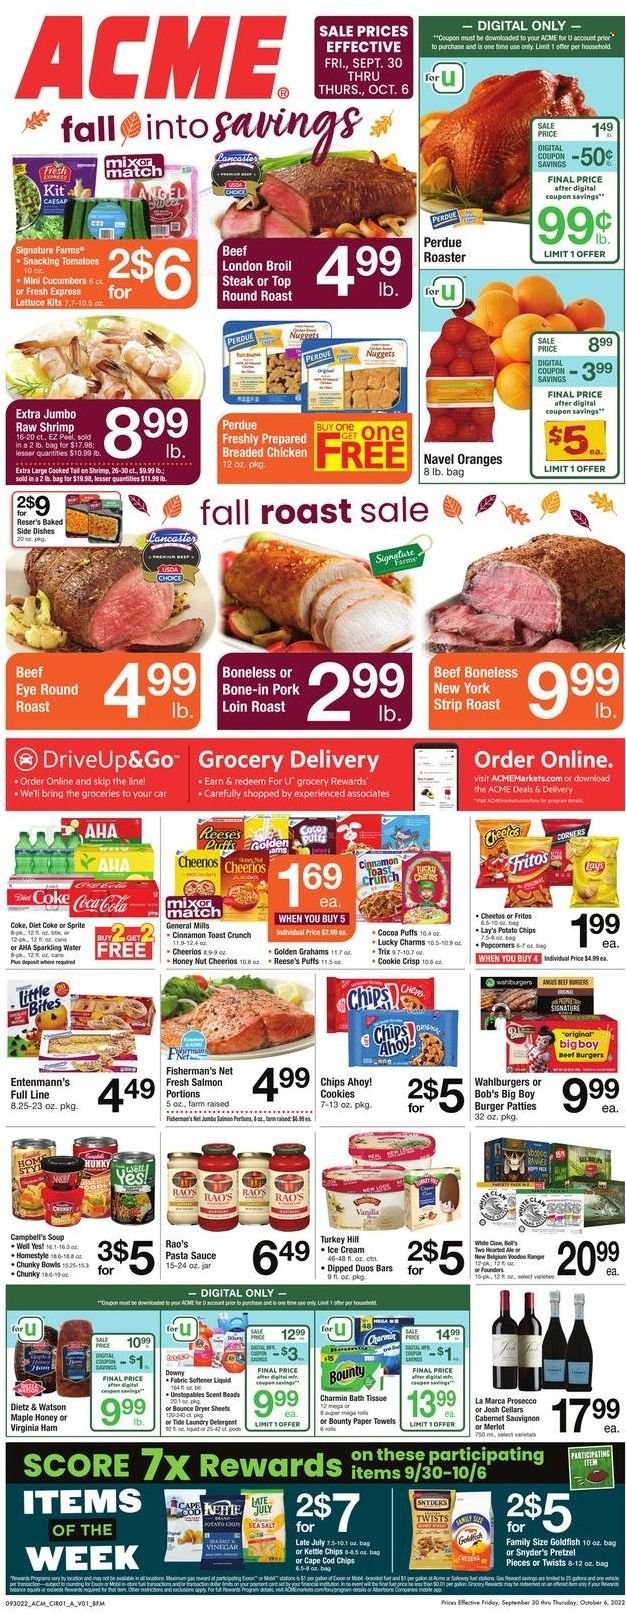 thumbnail - ACME Flyer - 09/30/2022 - 10/06/2022 - Sales products - pretzels, Ace, puffs, Entenmann's, cucumber, tomatoes, lettuce, oranges, cod, salmon, shrimps, Campbell's, pasta sauce, soup, nuggets, hamburger, sauce, fried chicken, beef burger, Perdue®, ham, virginia ham, Dietz & Watson, ice cream, Reese's, cookies, Bounty, Chips Ahoy!, Fritos, potato chips, Cheetos, chips, Lay’s, popcorn, Goldfish, Cheerios, Trix, cinnamon, Coca-Cola, Sprite, Diet Coke, sparkling water, Cabernet Sauvignon, prosecco, White Claw, beef meat, steak, eye of round, round roast, burger patties, pork loin, pork meat, bath tissue, kitchen towels, paper towels, Charmin, detergent, Tide, Unstopables, fabric softener, laundry detergent, Bounce, dryer sheets, Downy Laundry, roaster, navel oranges. Page 1.